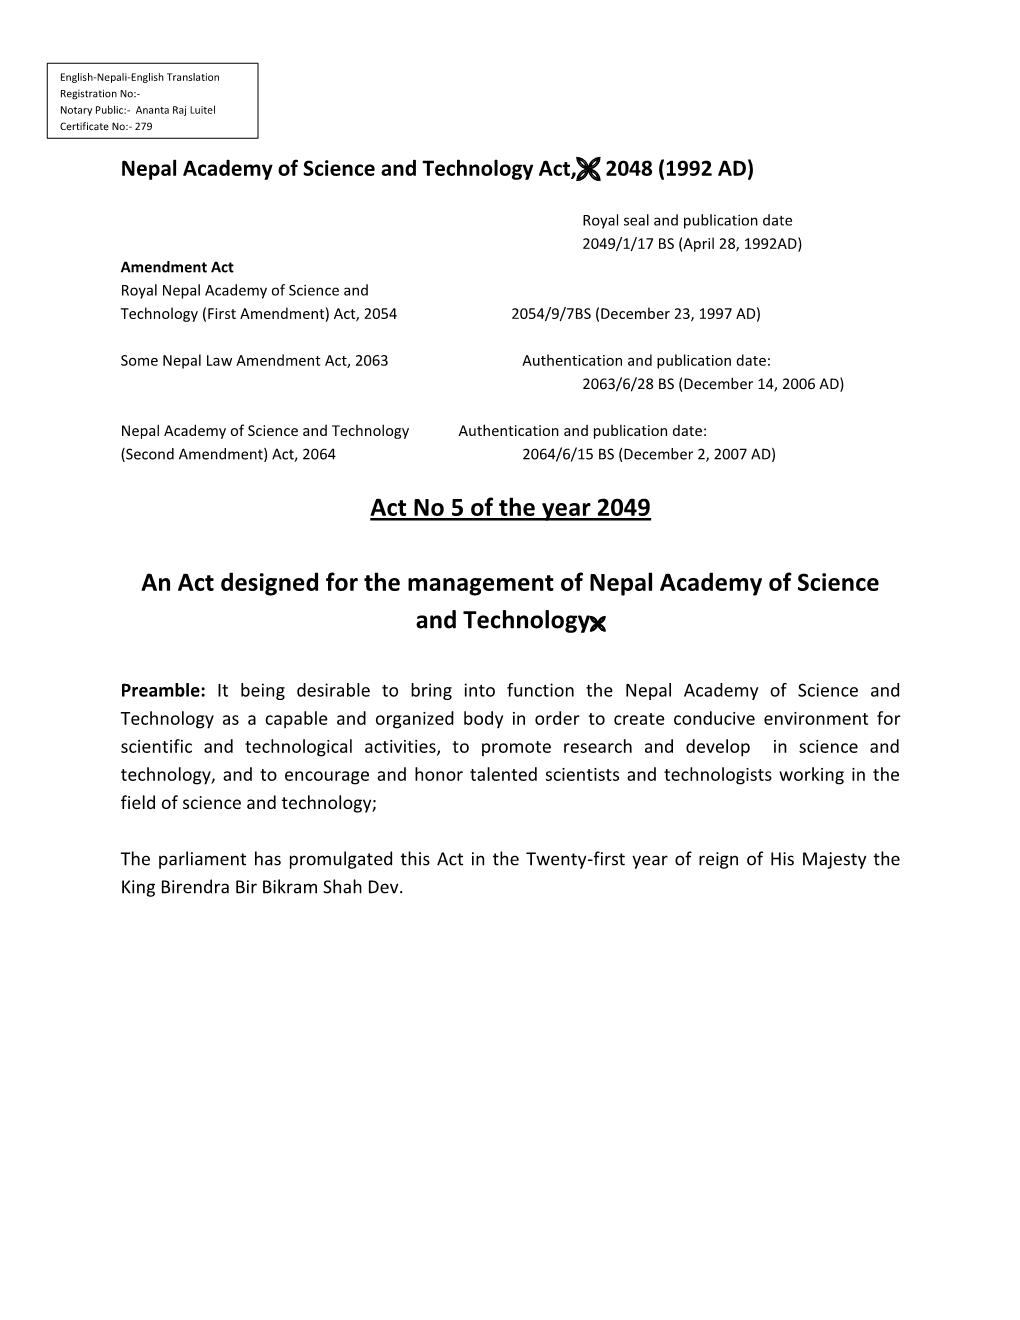 Nepal Academy of Science and Technology Act, 2048 (1992